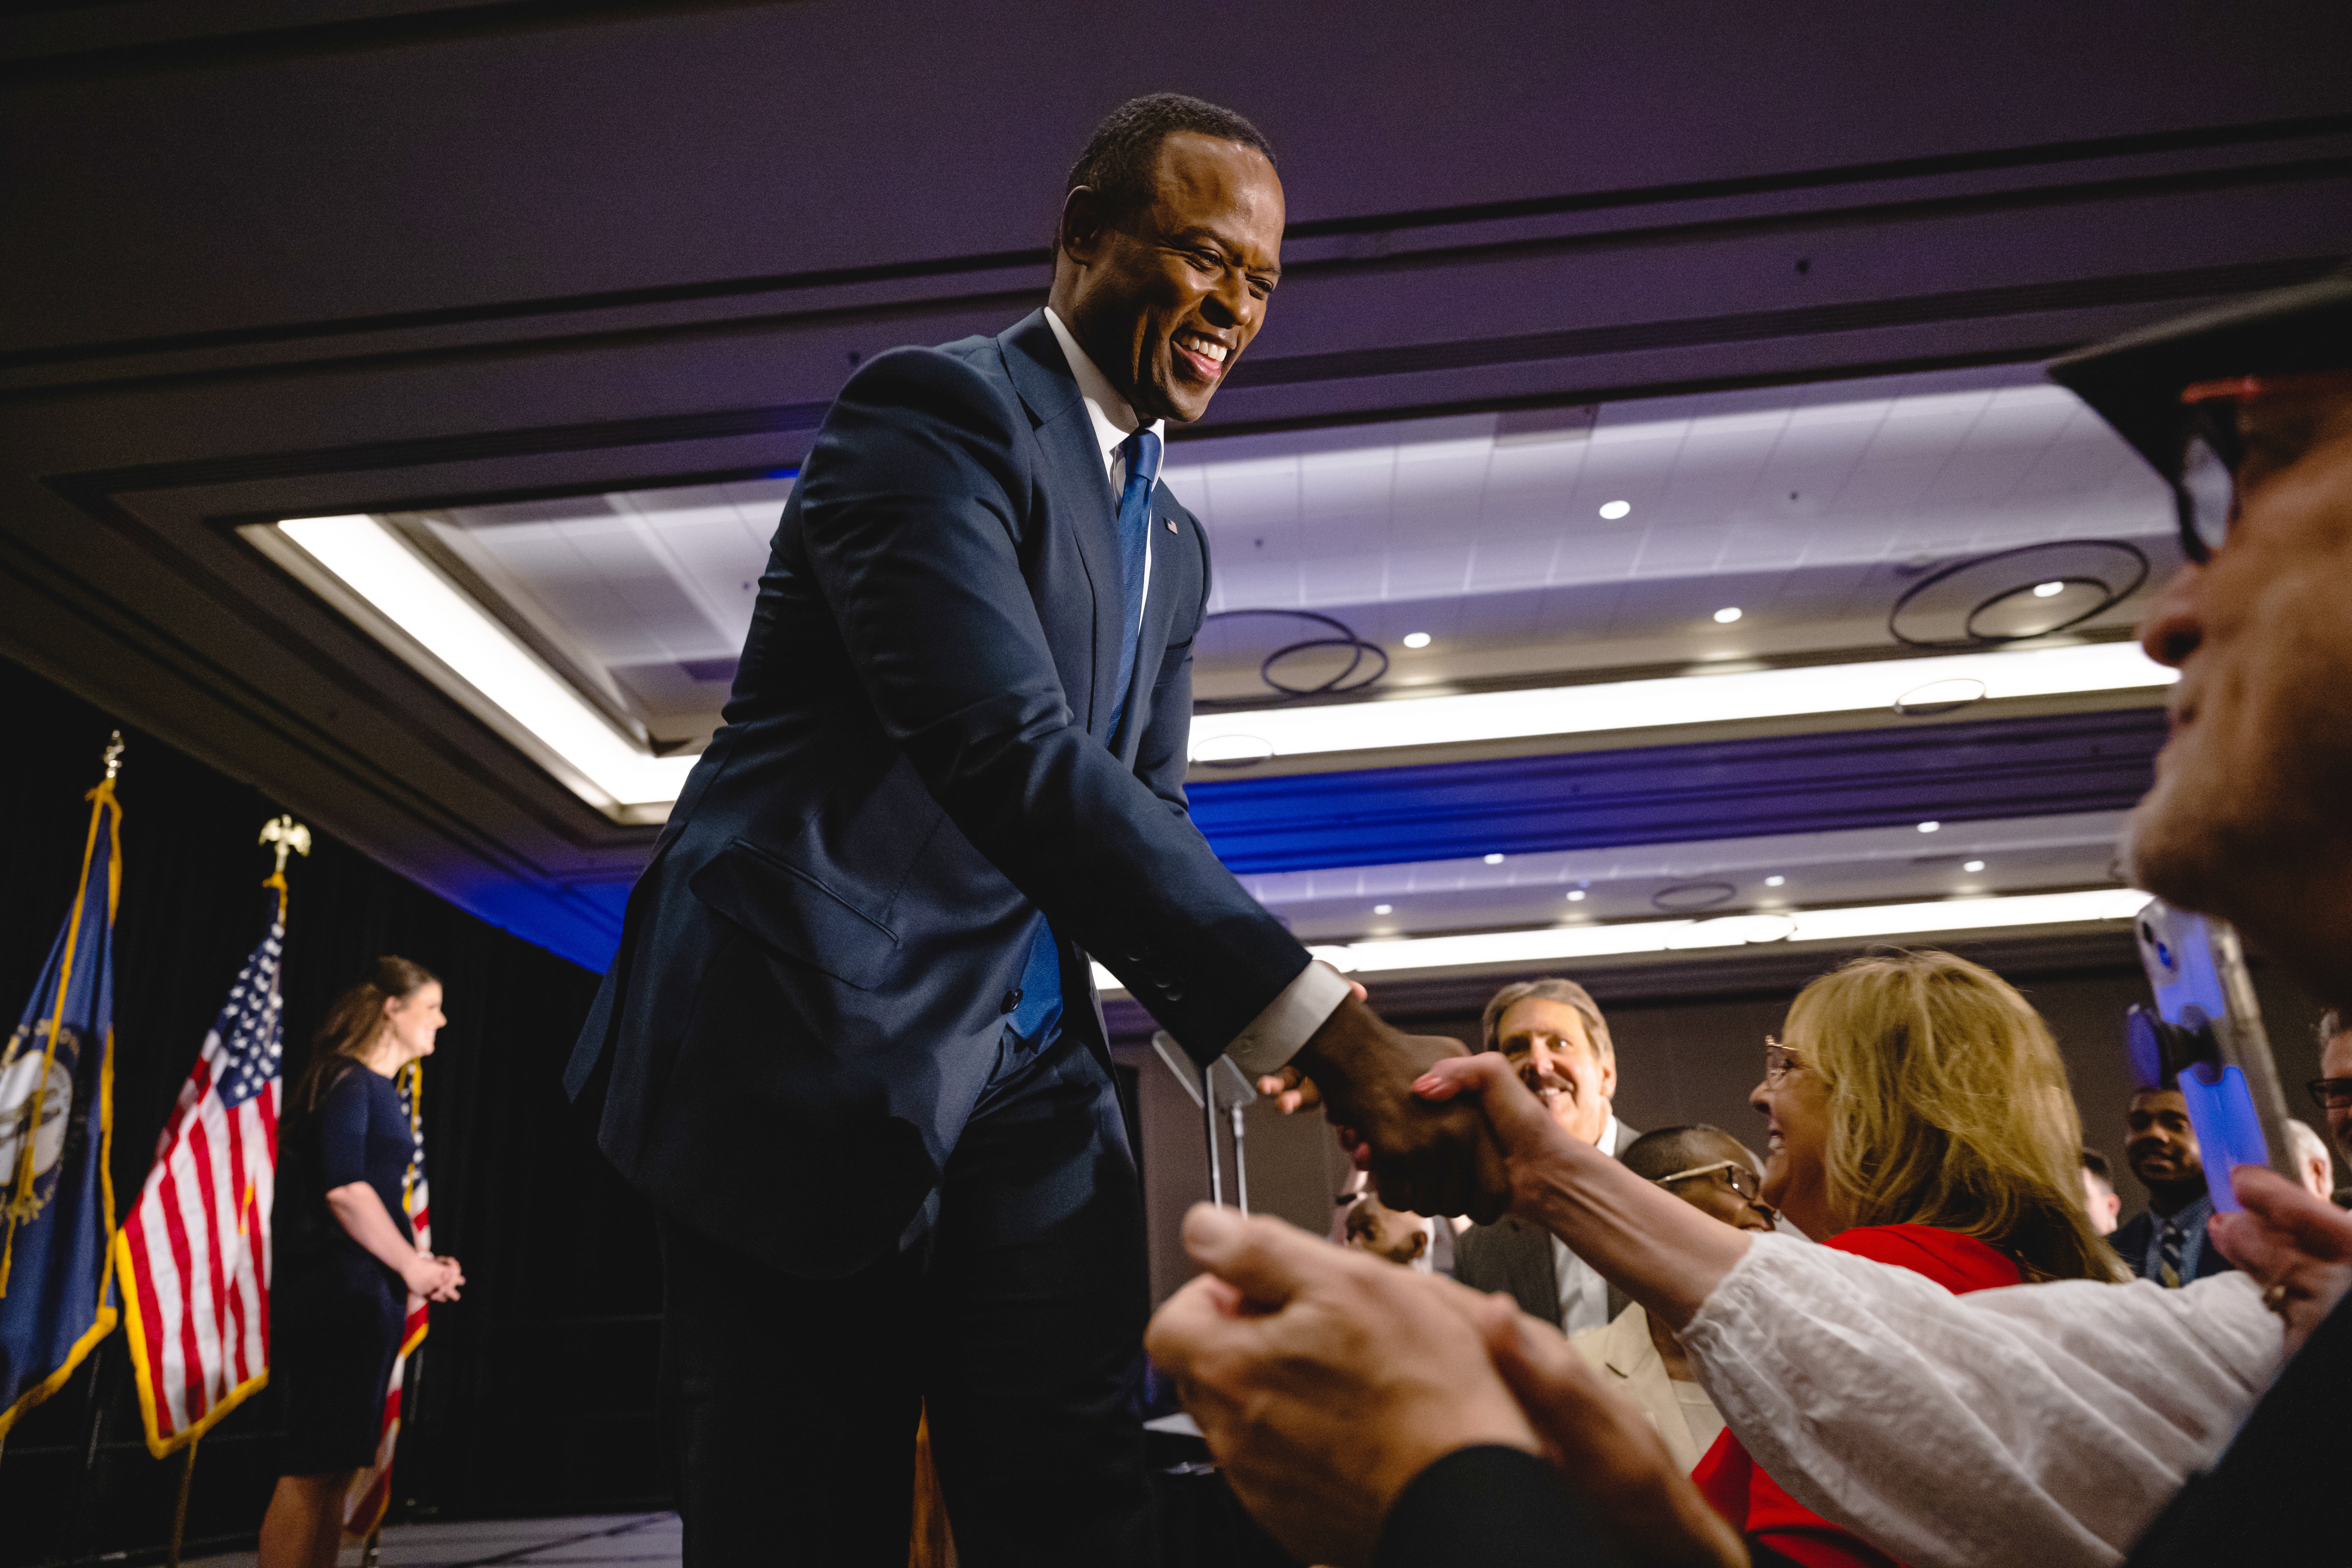 LOUISVILLE, KENTUCKY - MAY 16: Kentucky Attorney General Daniel Cameron greets supporters following his victory in the Republican primary for governor at an election night watch party at the Galt House Hotel. (Jon Cherry/Getty Images)